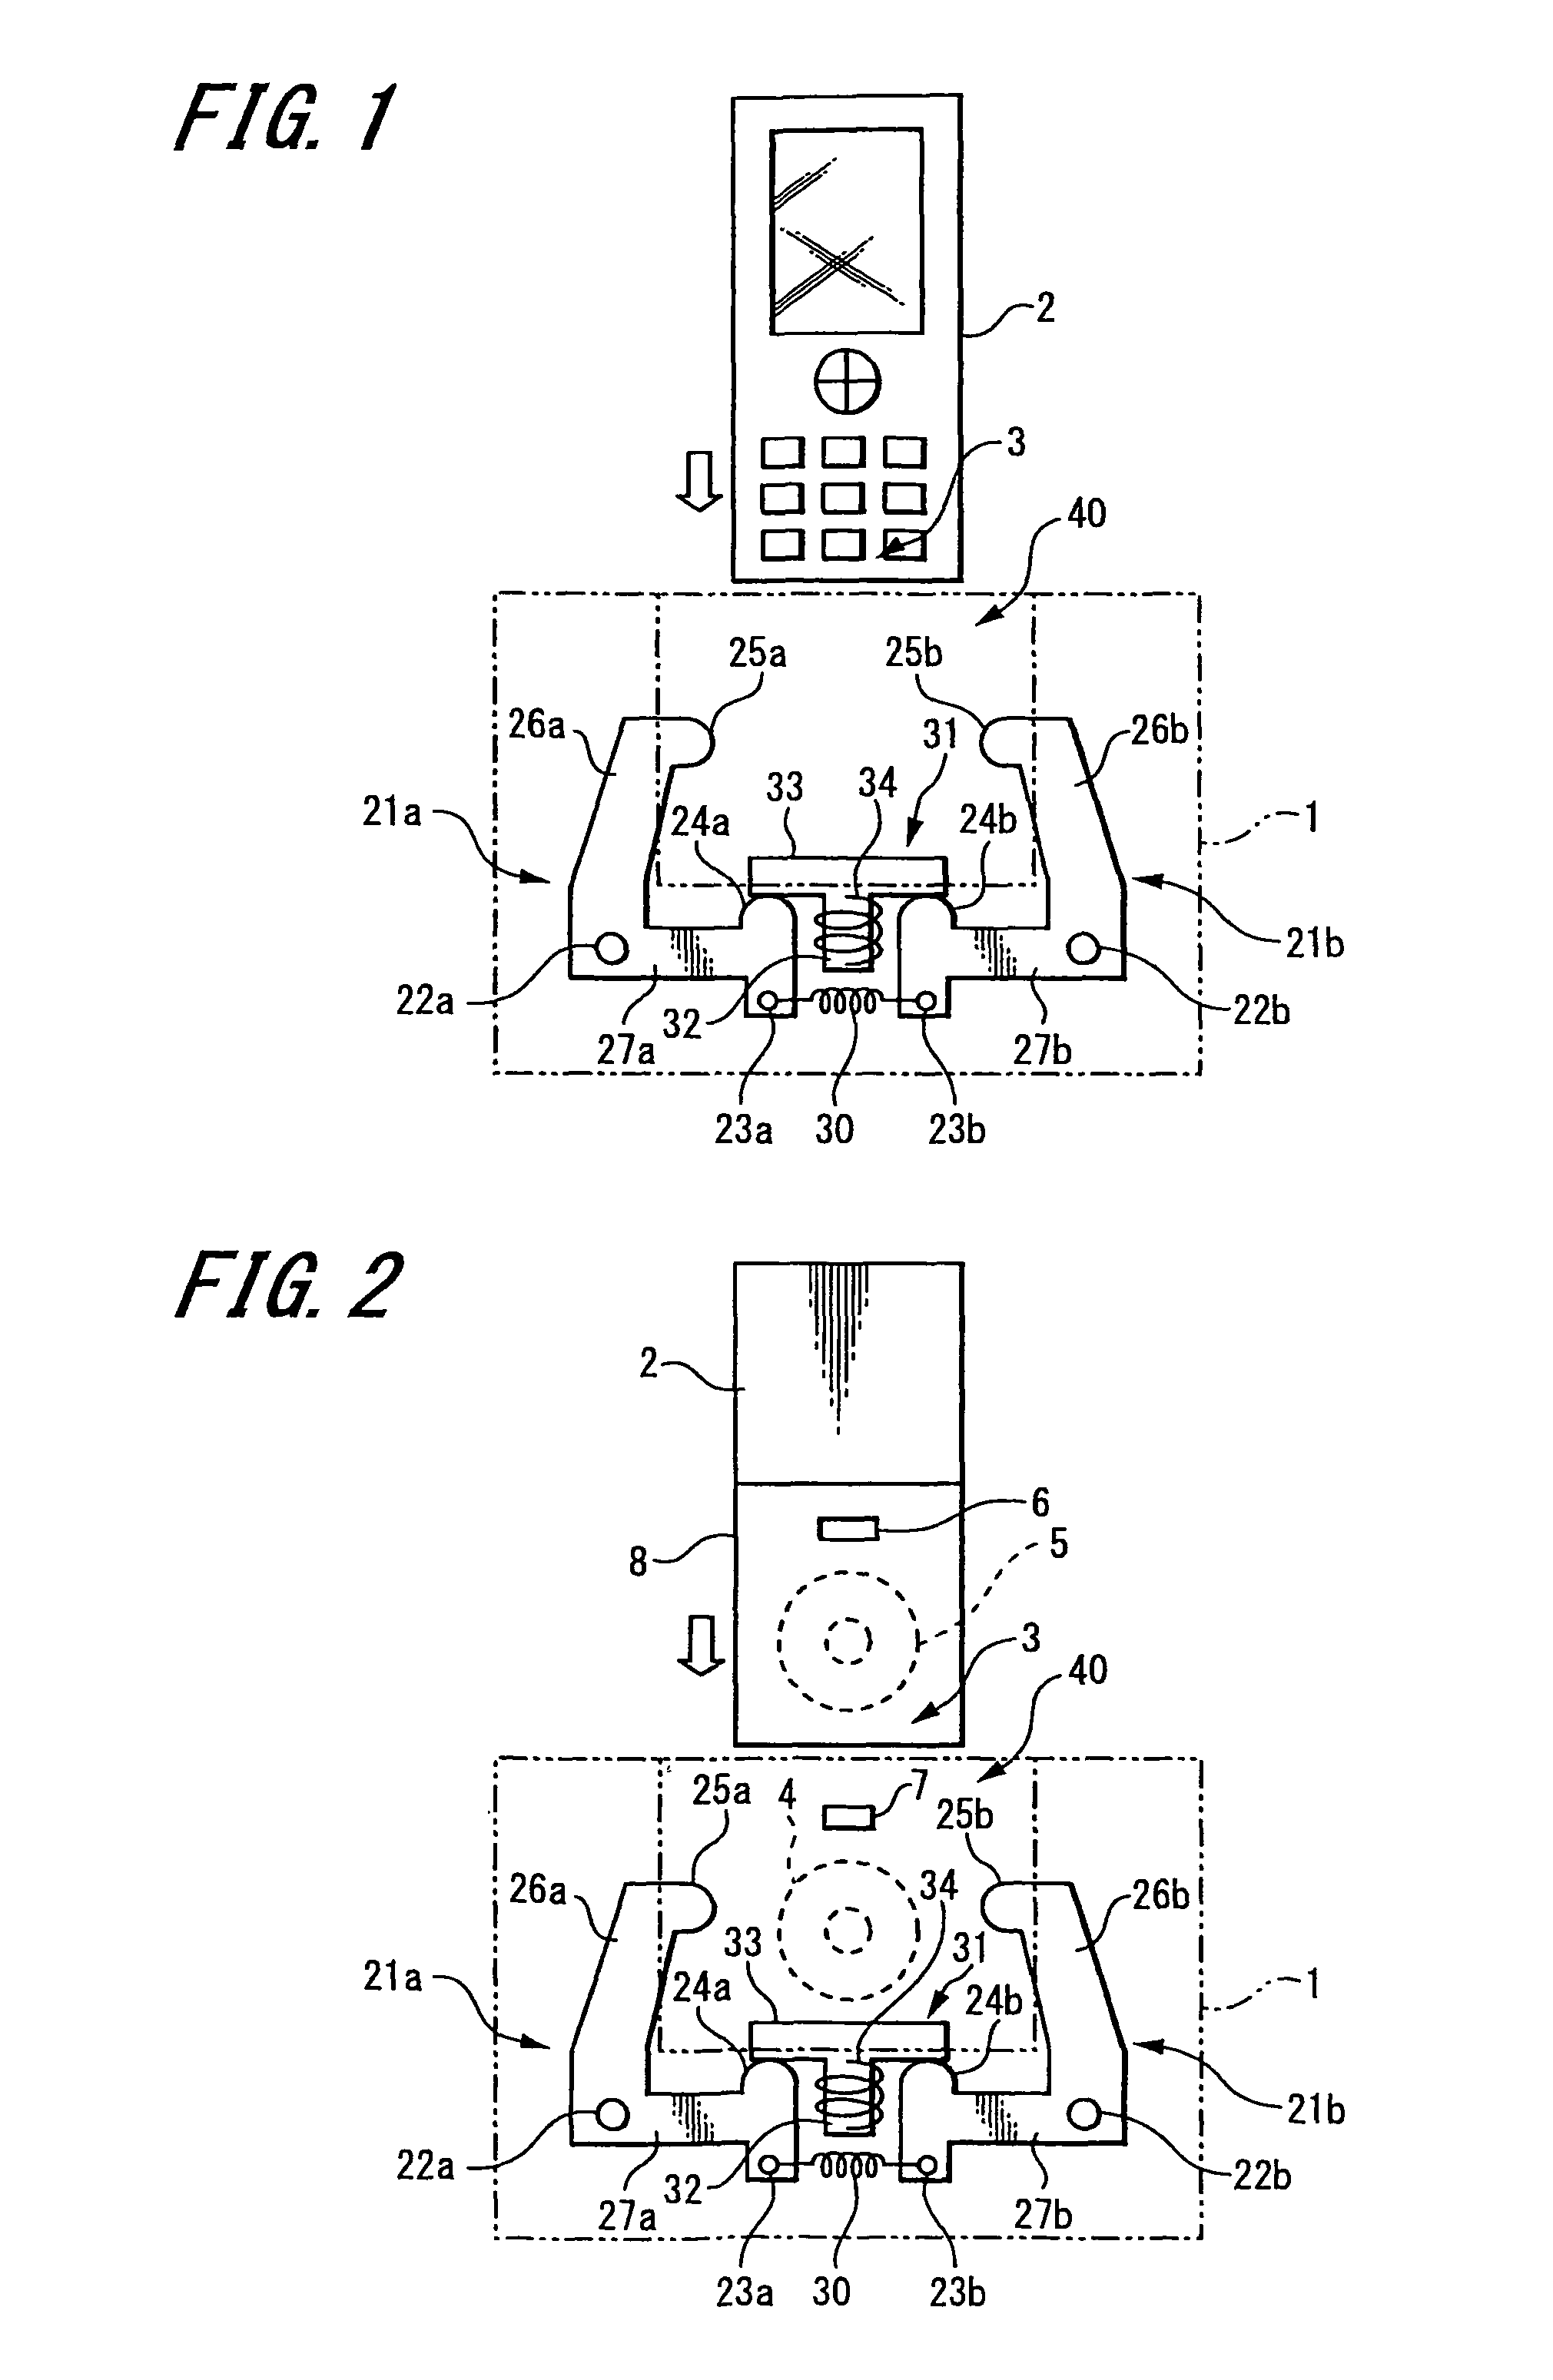 Contactless power transferring apparatus